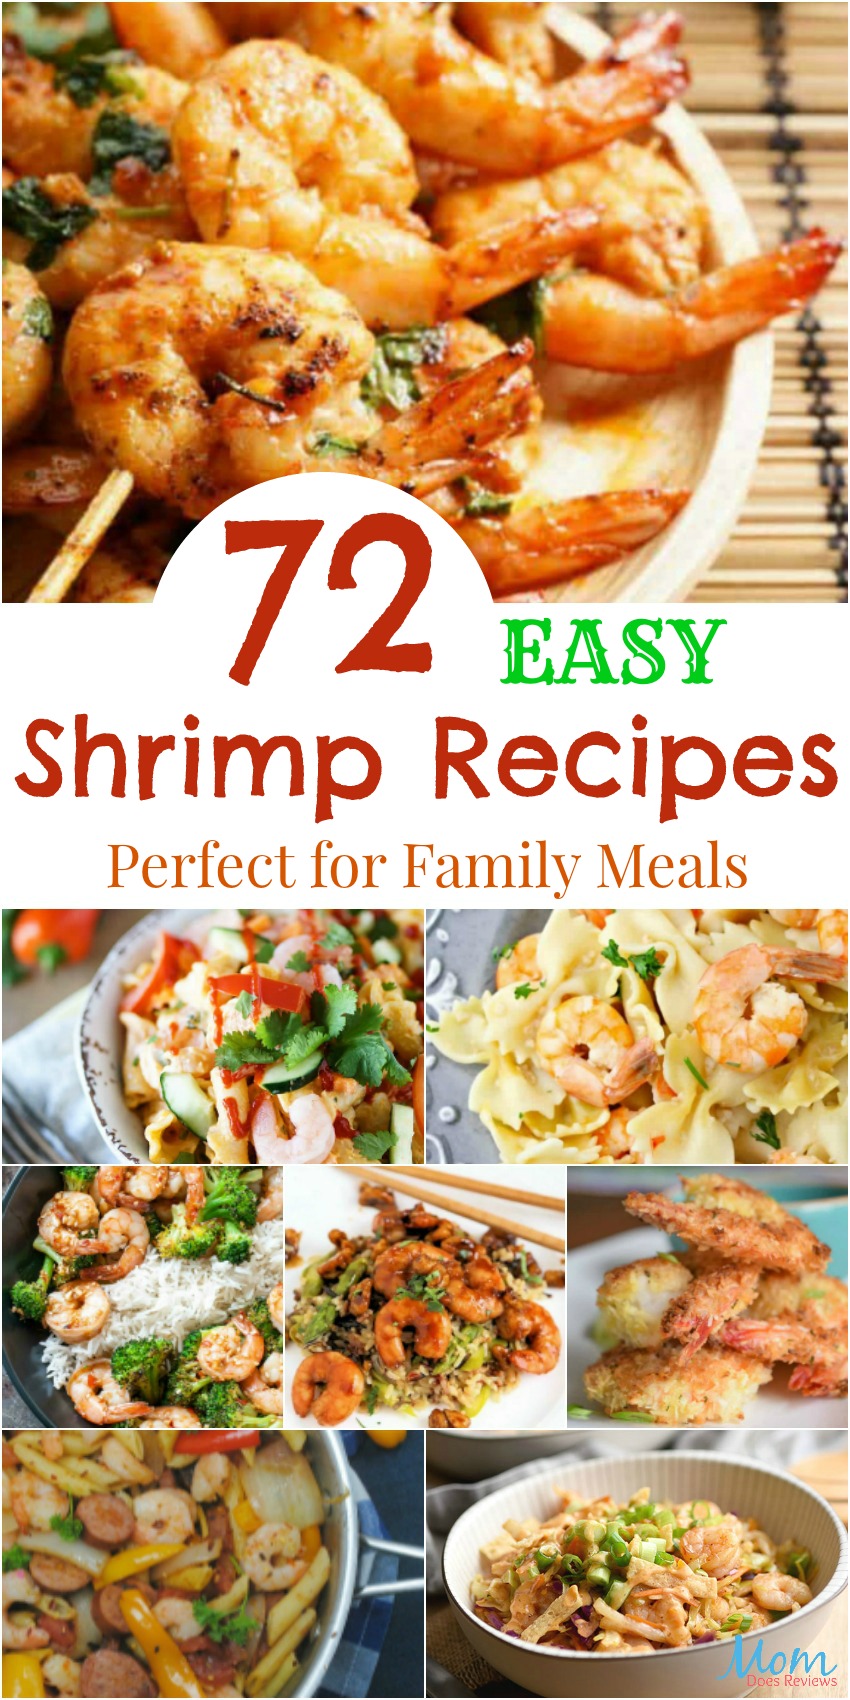 72 Easy Shrimp Recipes Perfect for Family Meals #recipes #meals #seafood #getinmybelly #shrimp #foodie